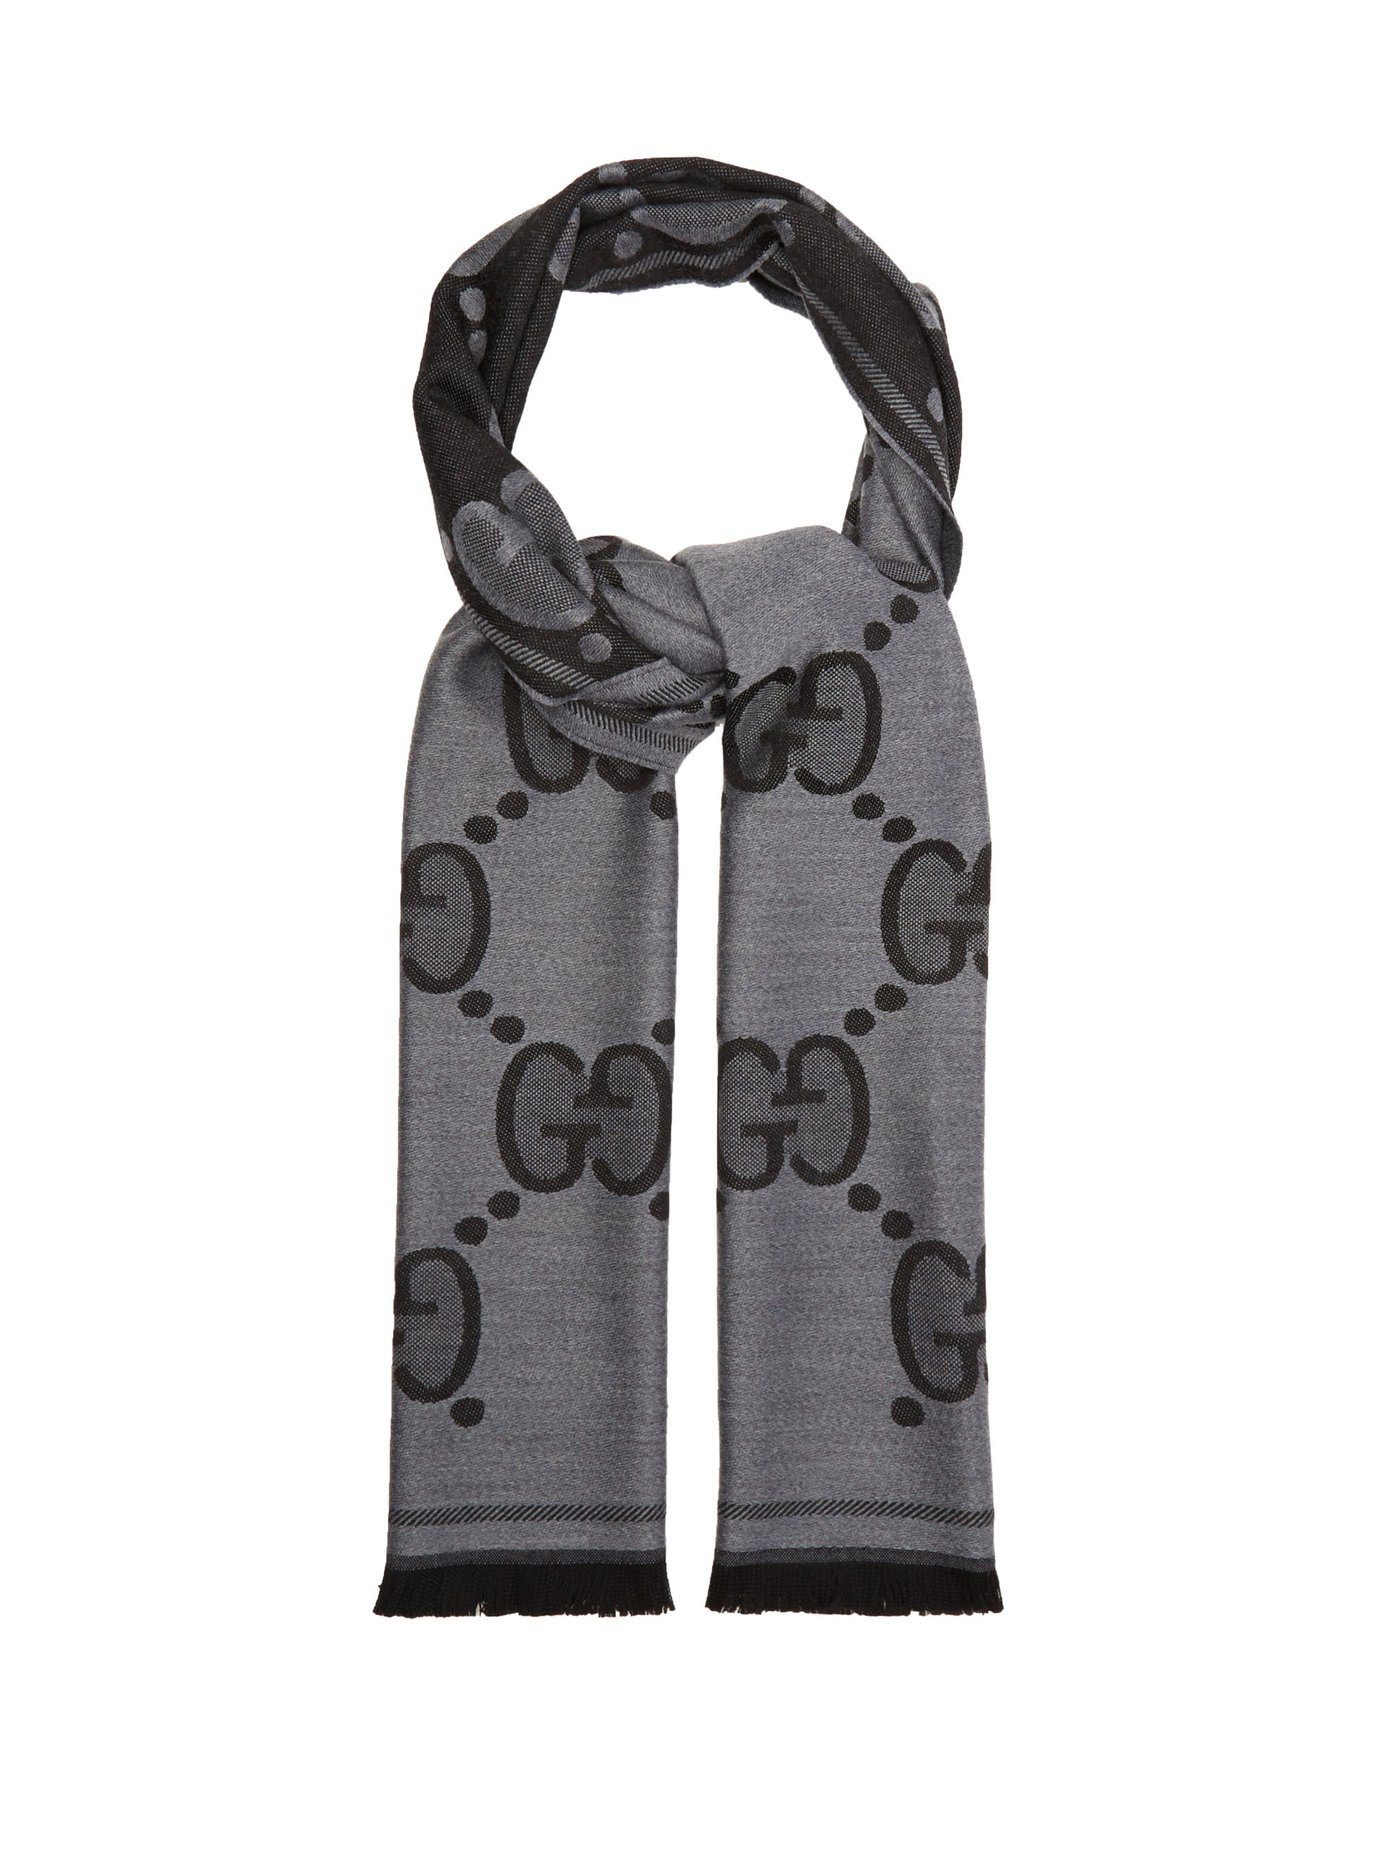 black and gray scarf